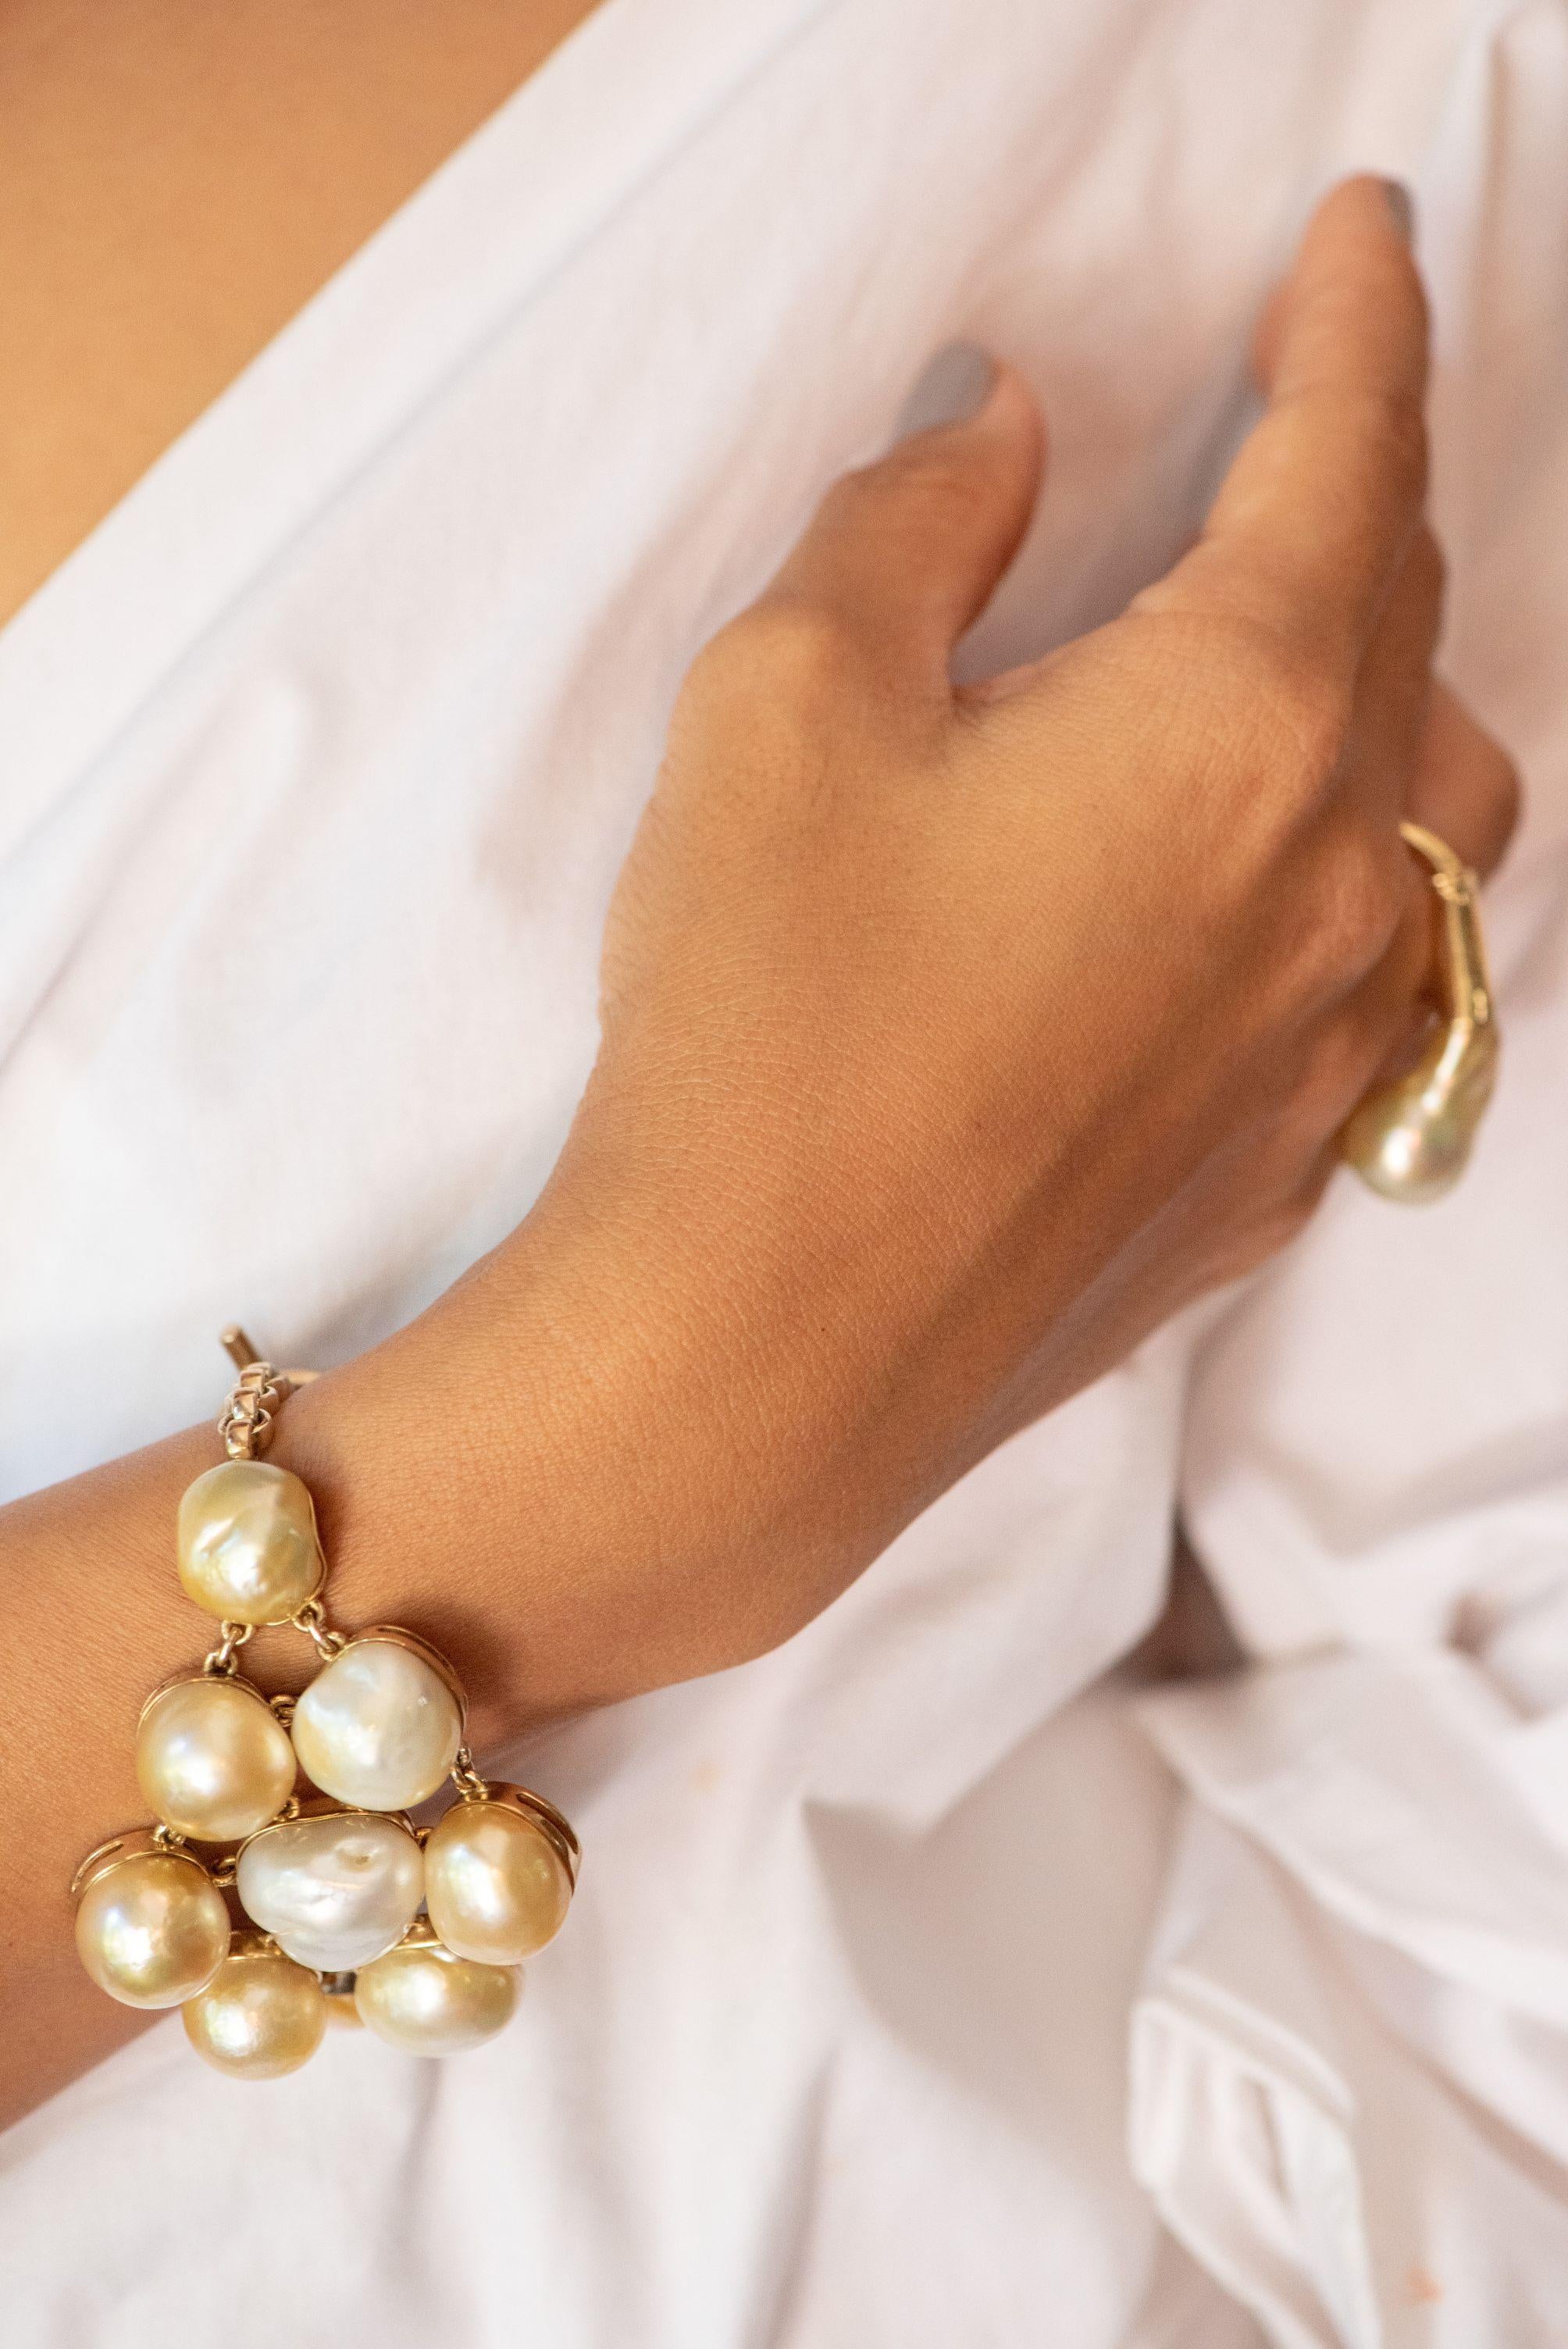 Nine iridescent gold and cream baroque south sea pearls nestled in a sterling silver and 18 karat gold plated bracelet will elevate any look. The bracelet is 19 by 5.5 cm, and the pearls a generous 14 to 17mm.